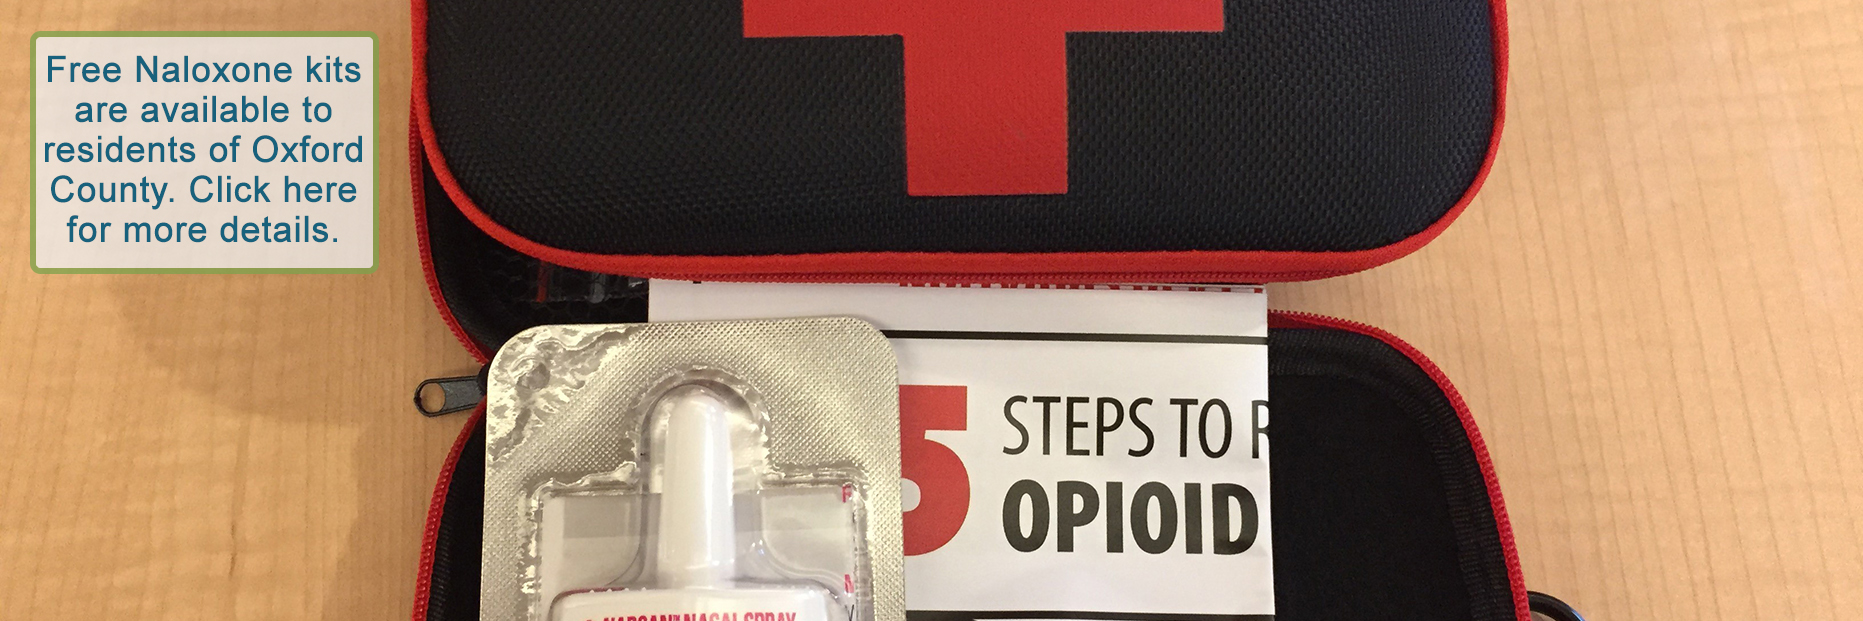 A close up photo showing a Naloxone kit. The kit shows "NARCAN NASAL SPRAY" and an instruction page.